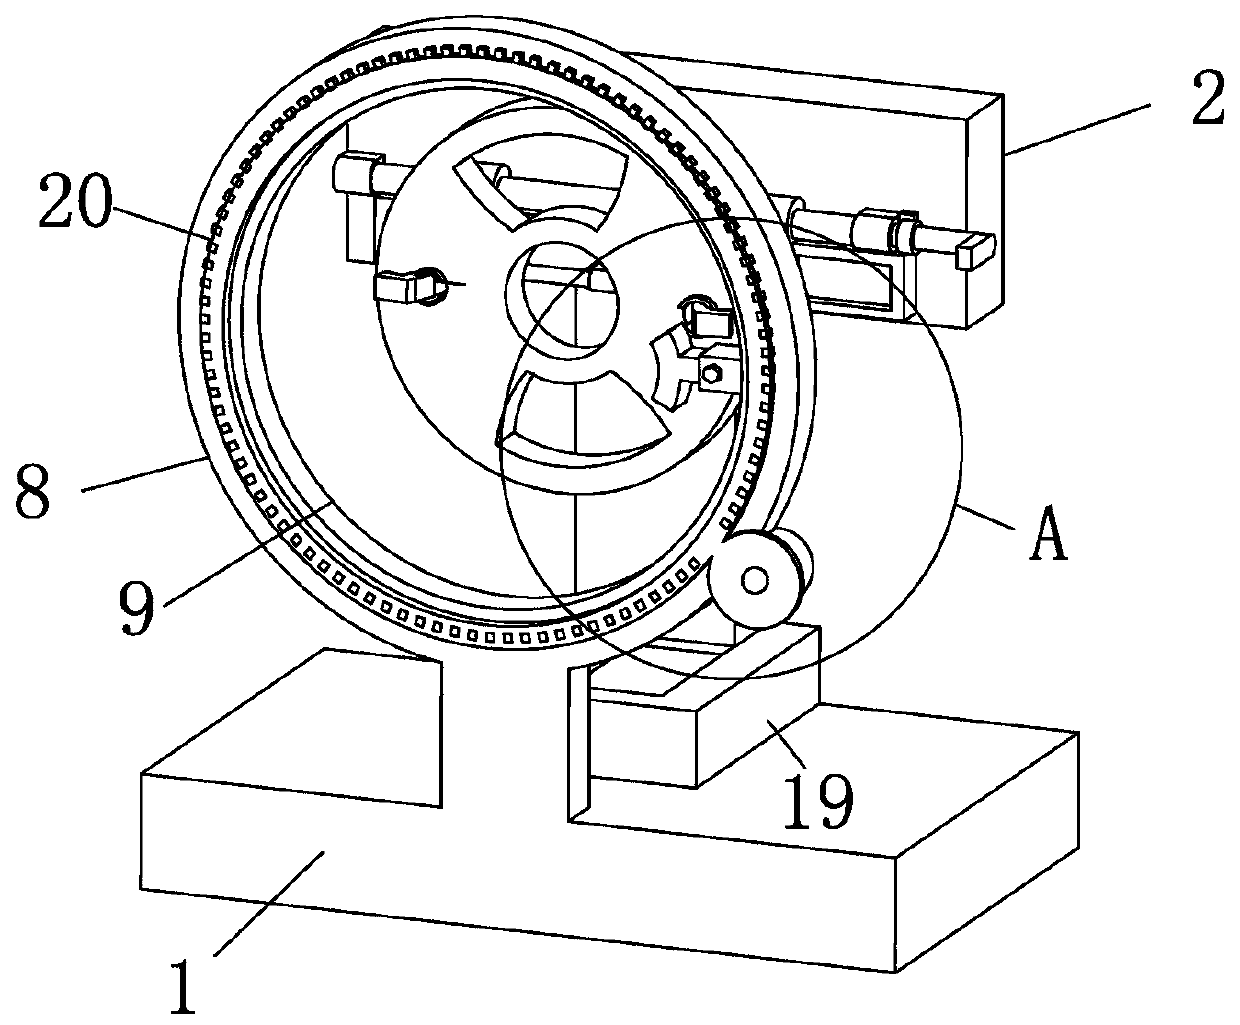 Tool clamp facilitating production of belt pulley